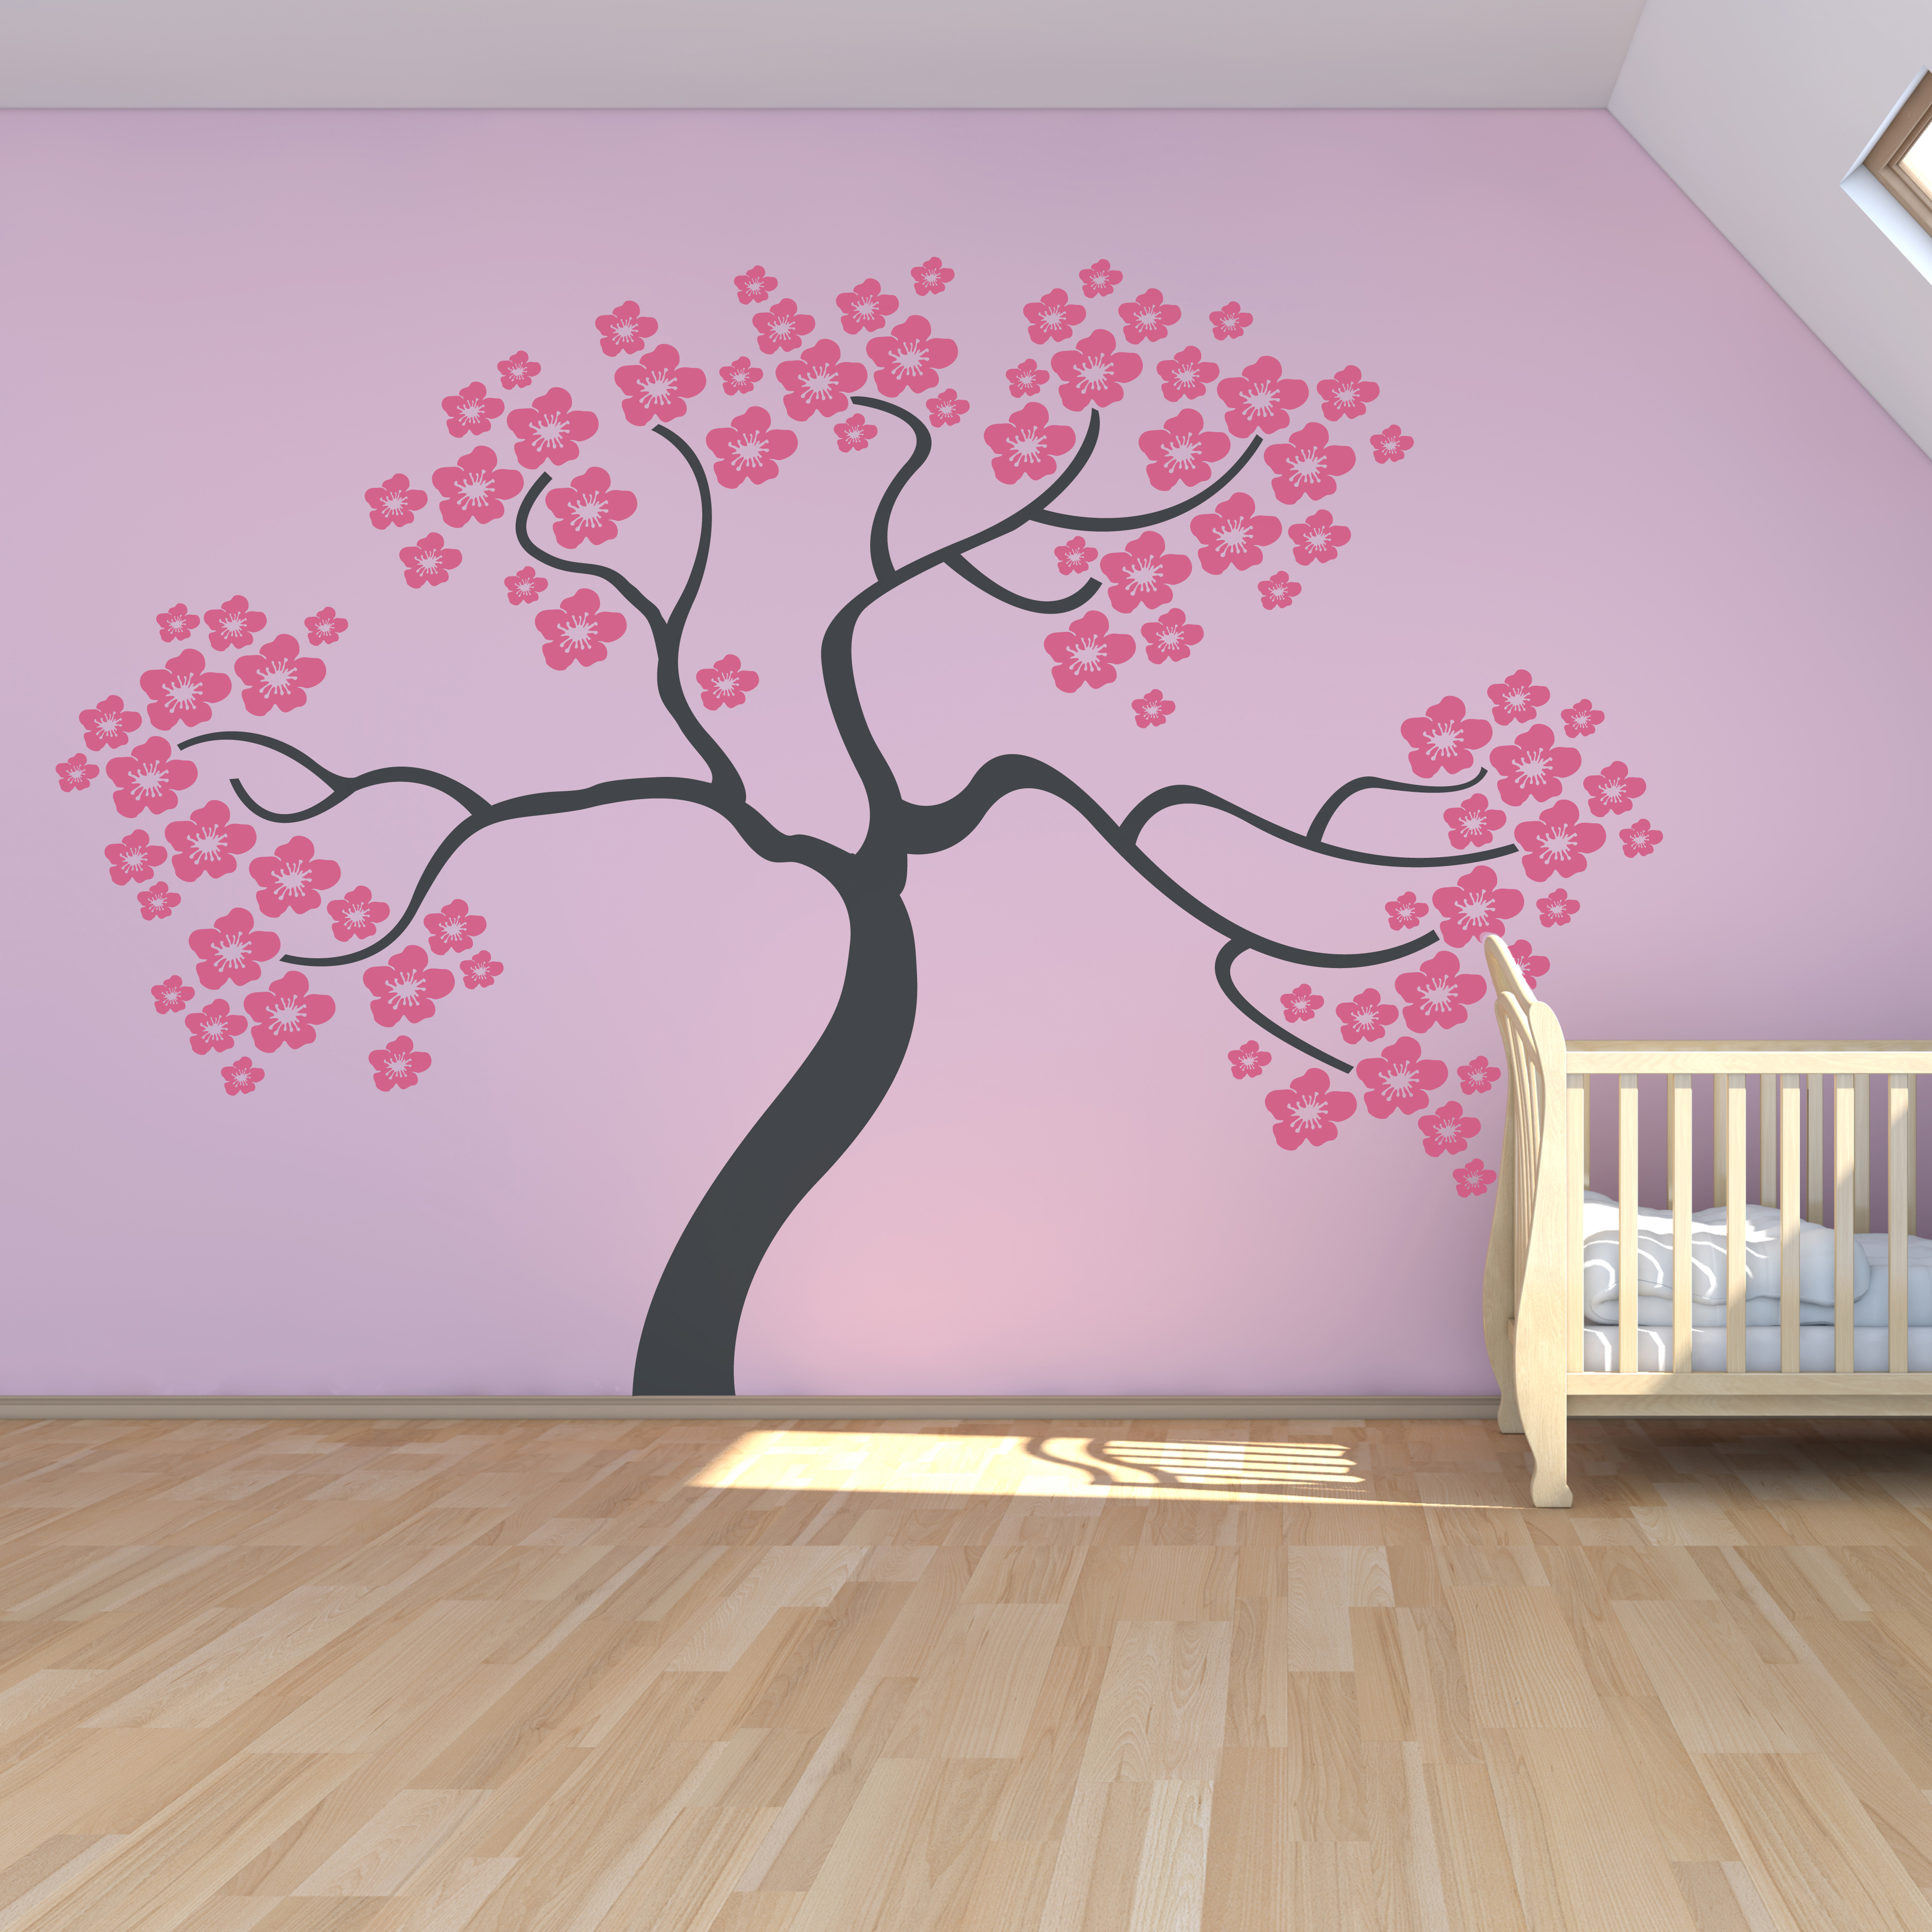 Wondrous Wall Art Trees Design Collection Art For Your Room Interior ...